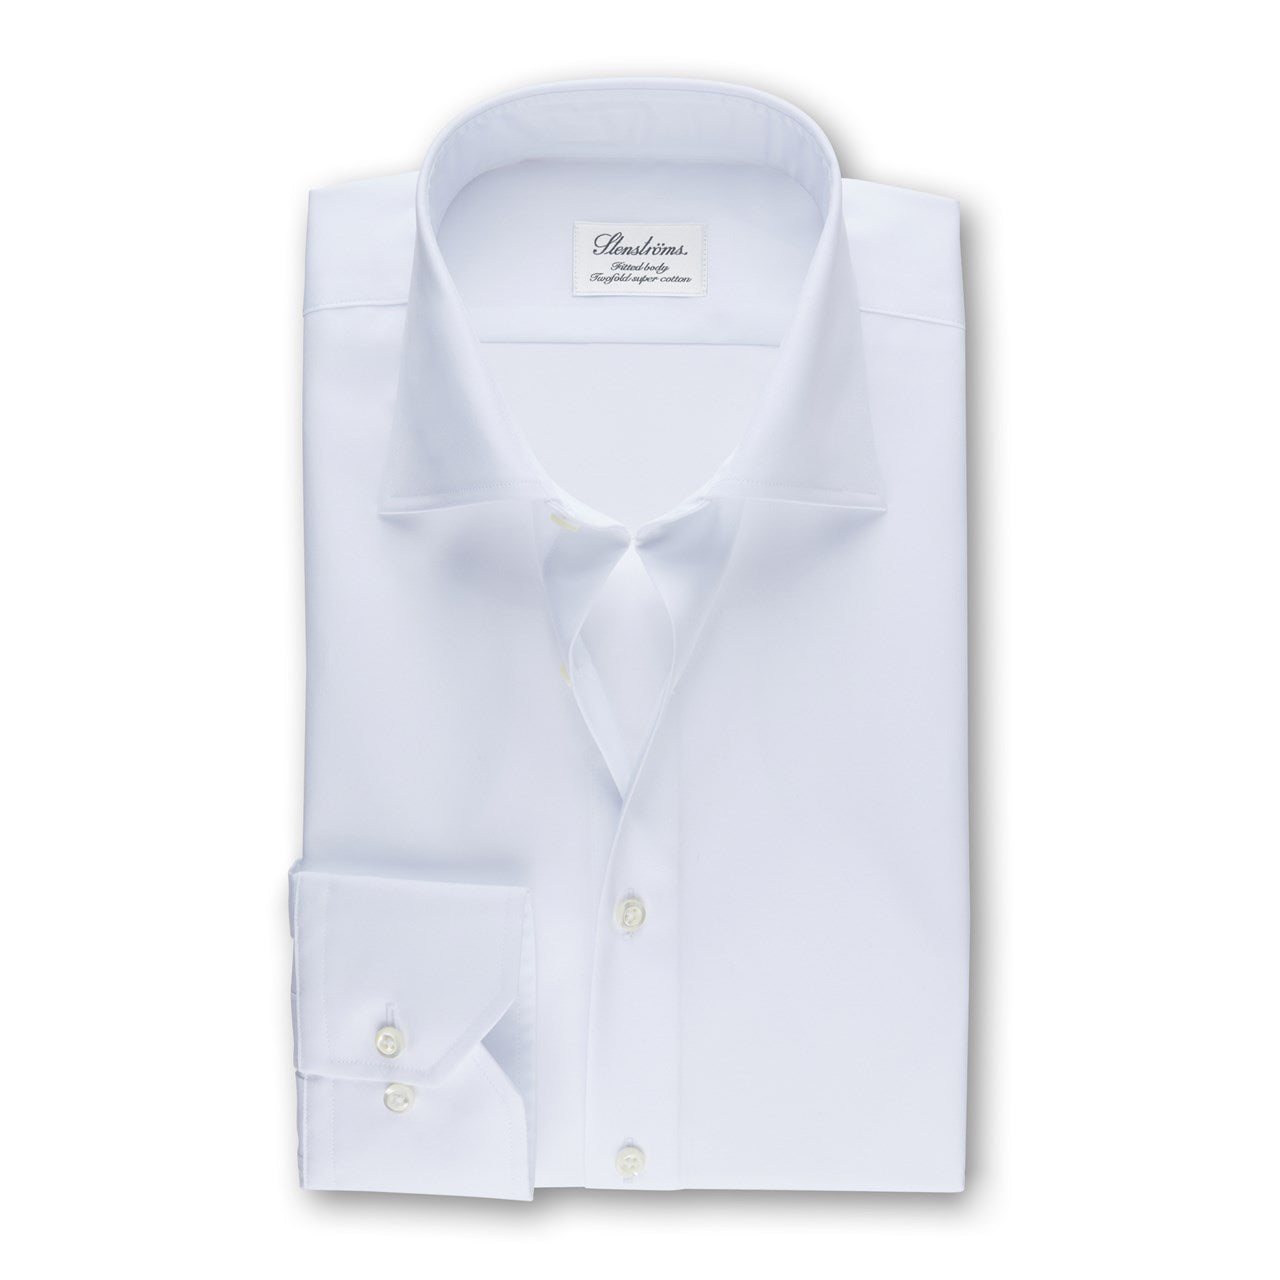 White twill shirt fitted body